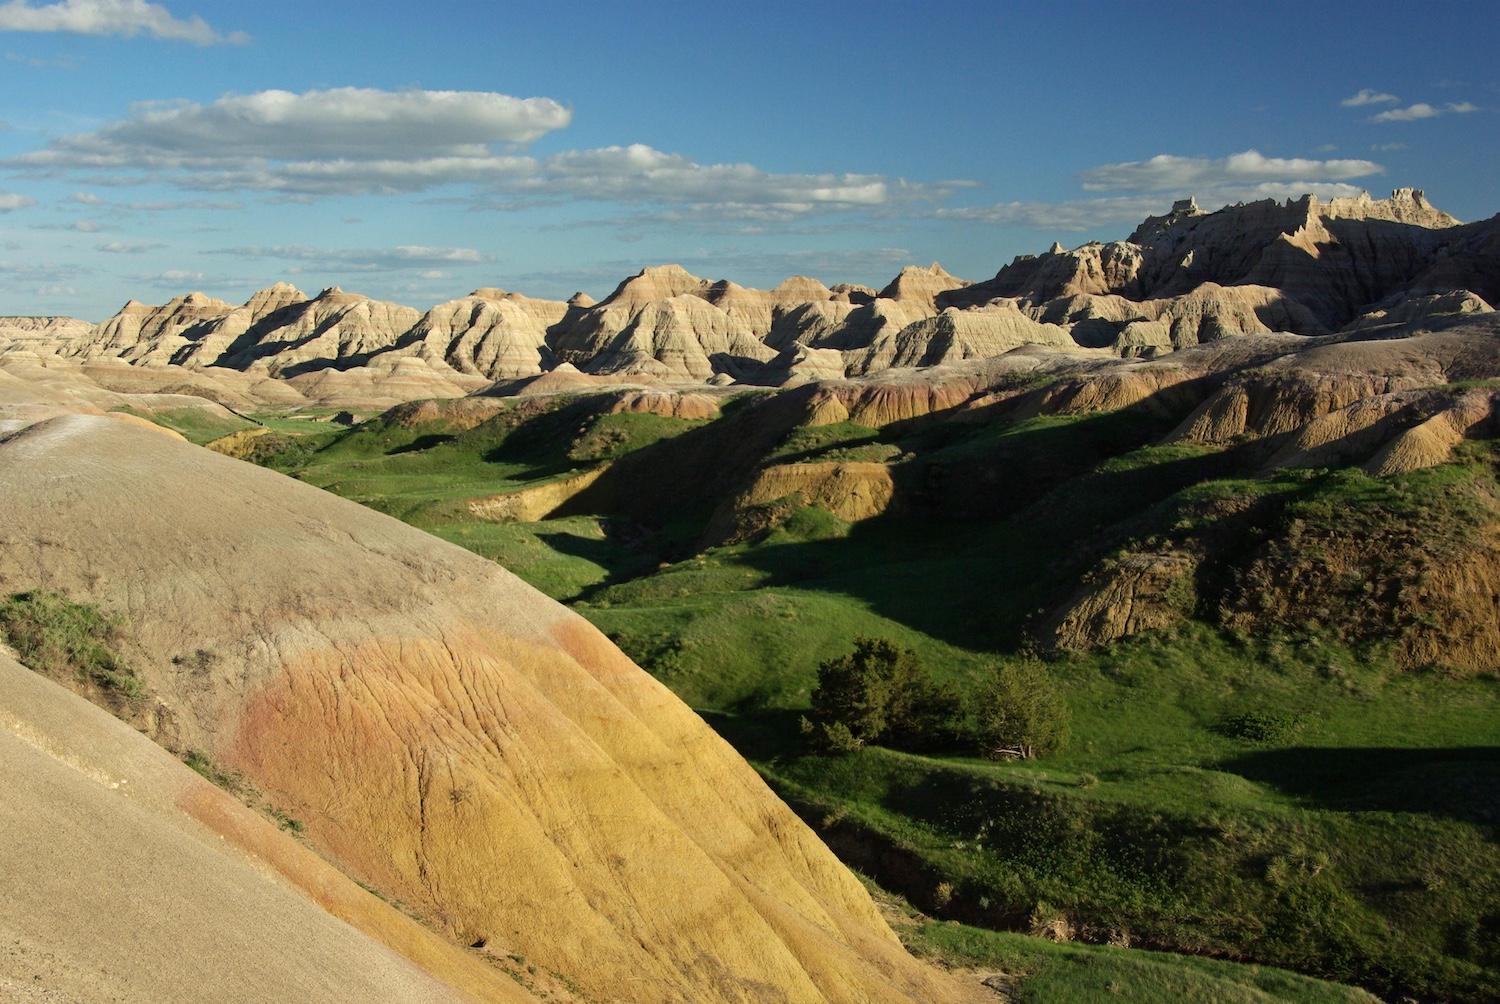 The rumpled landscape of Badlands National Park draws visitors who like to view it from overhead/NPS file. Larry McAfee